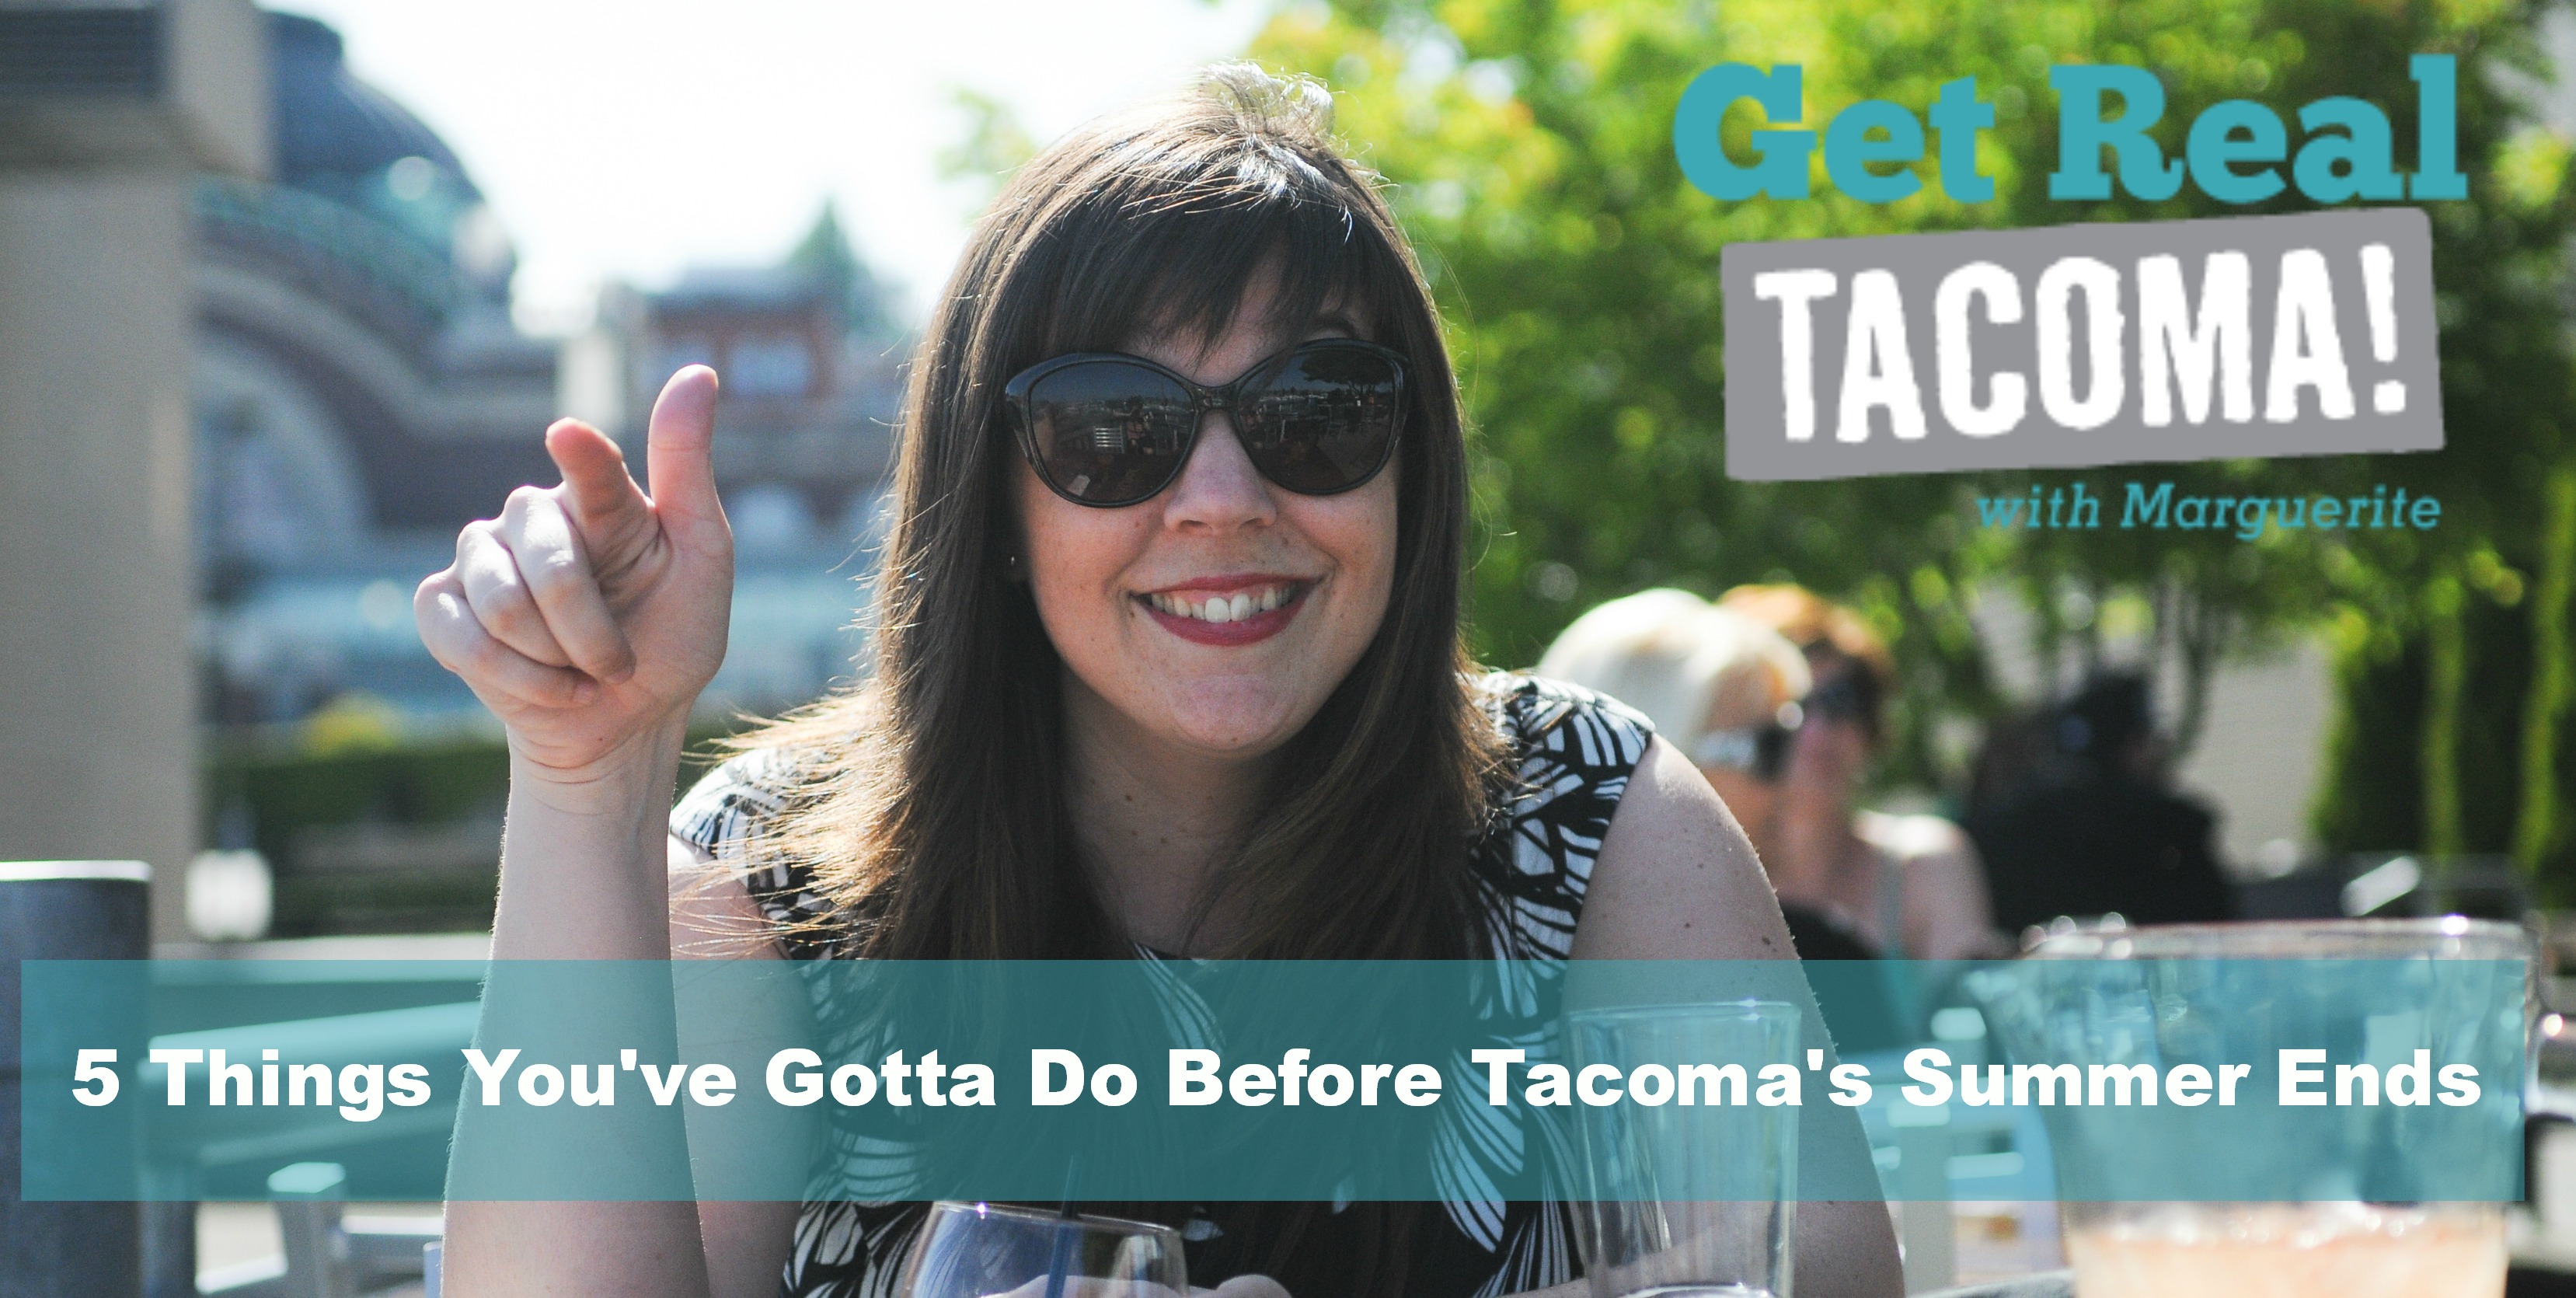 5 Things You’ve Gotta Do Before Tacoma’s Summer Ends!